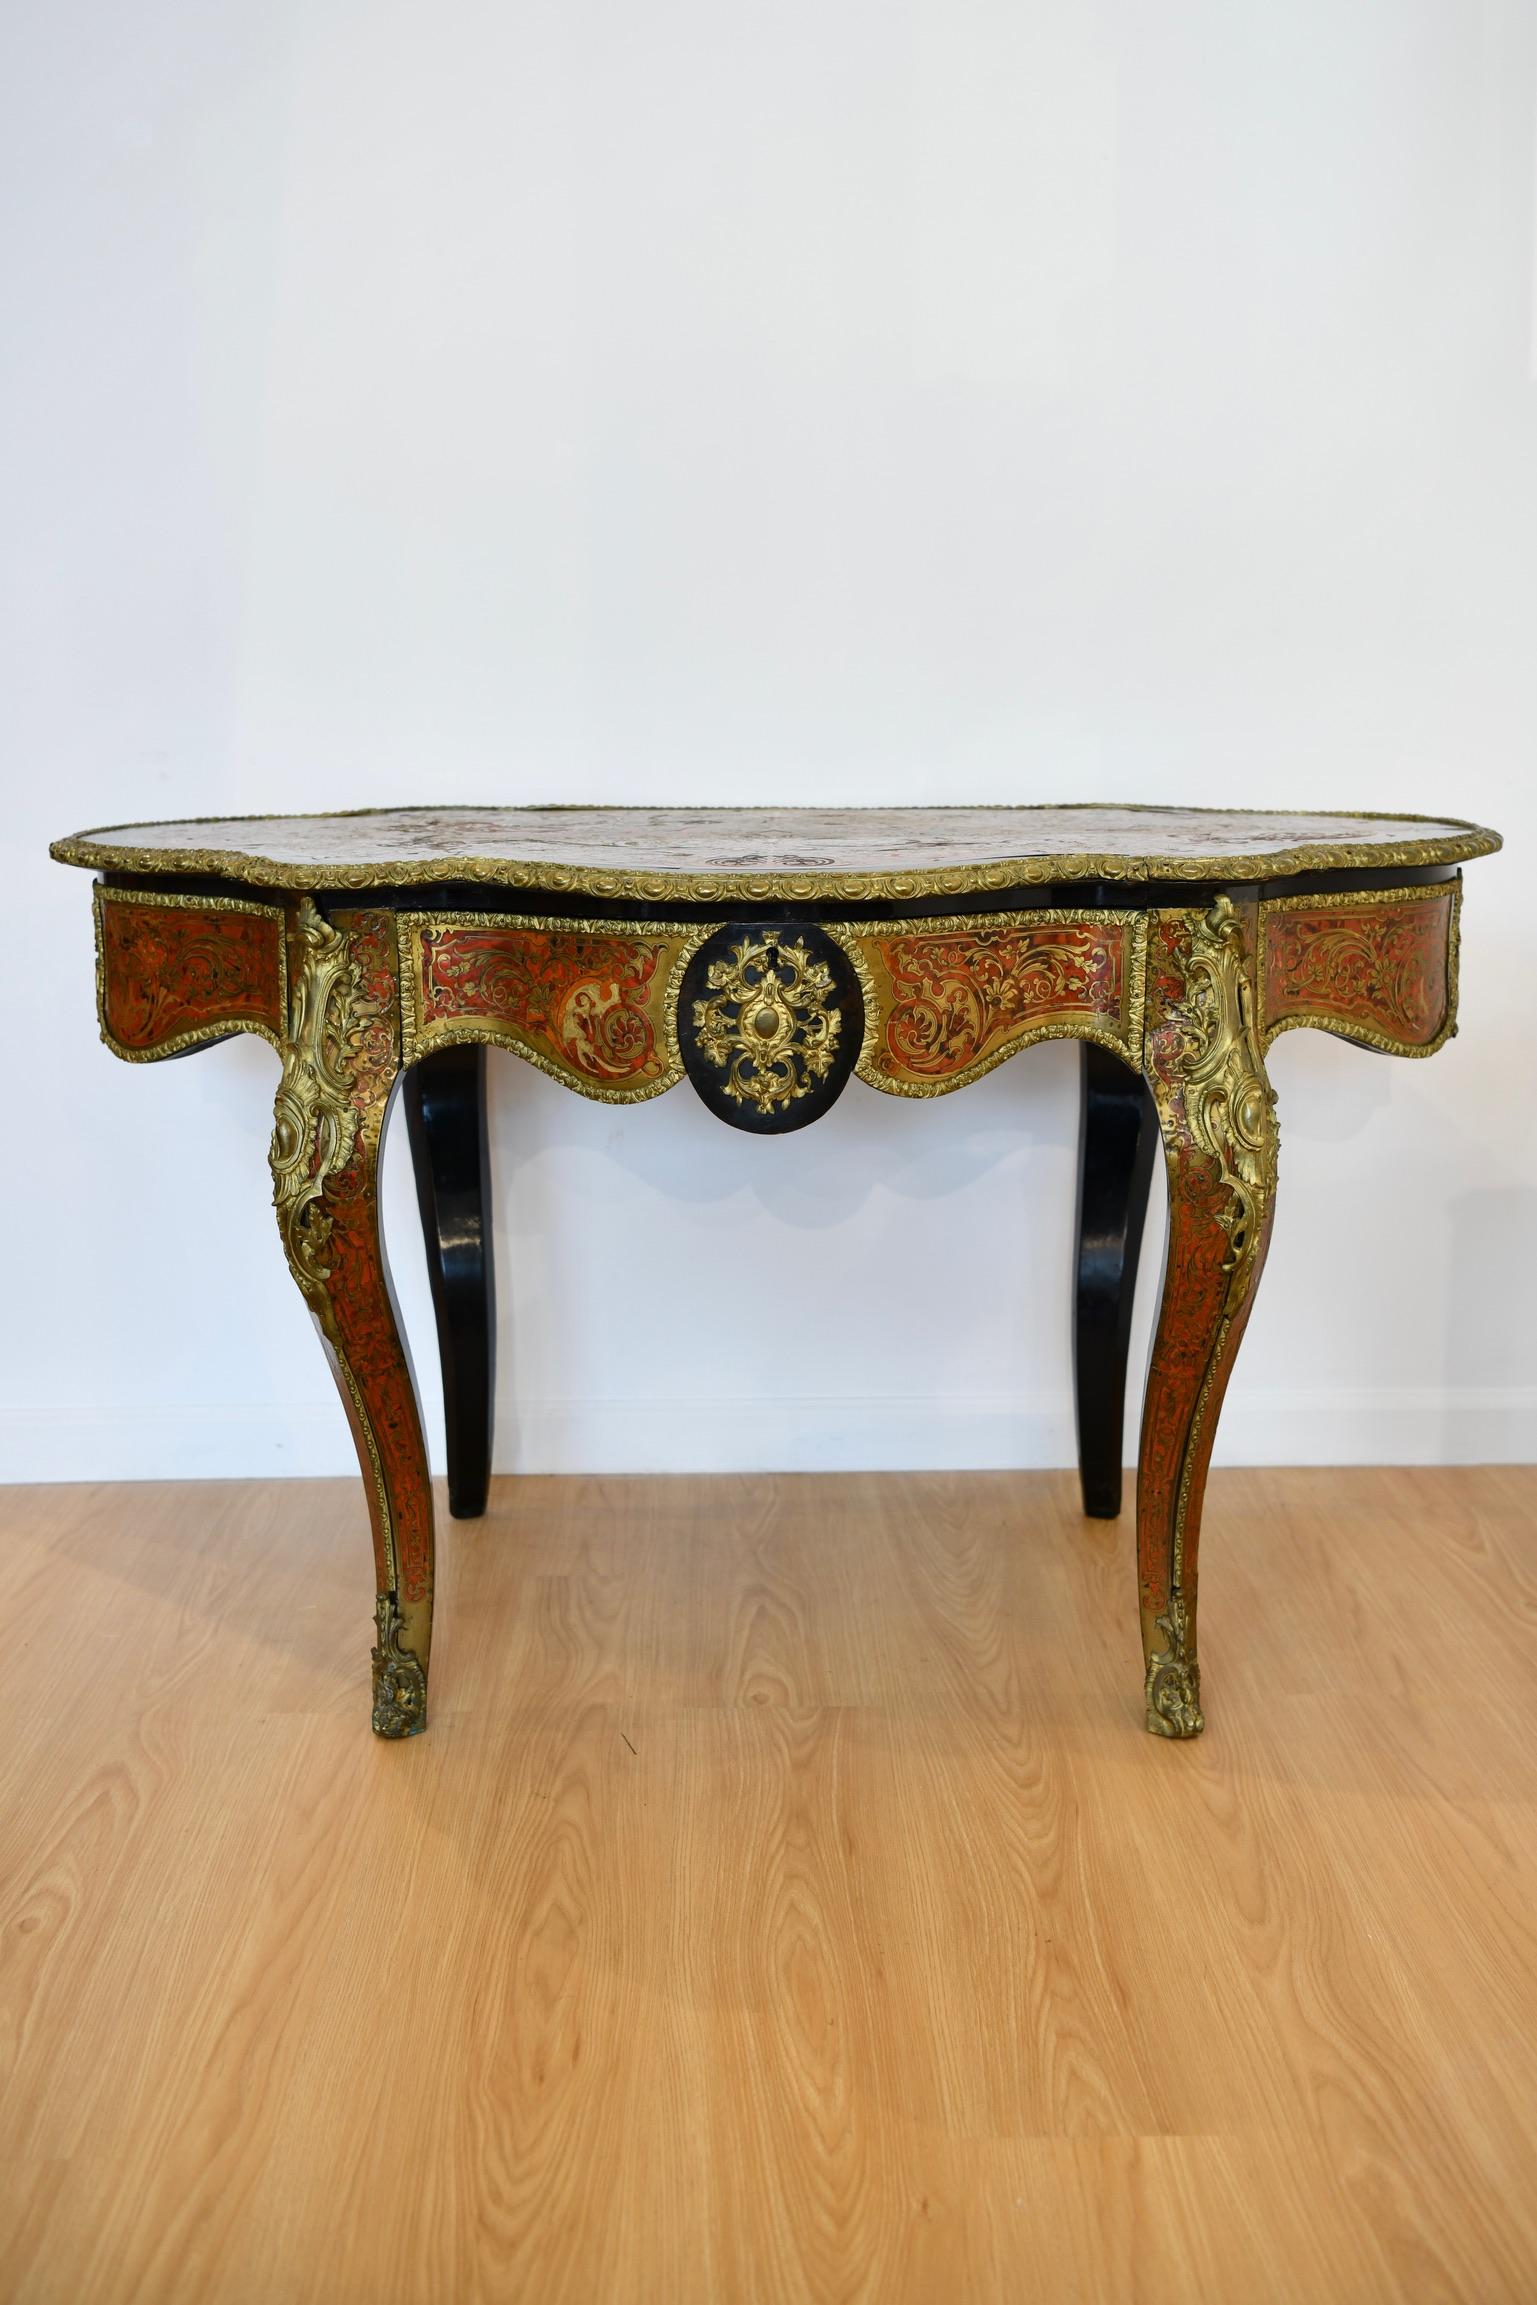 19th century French ebonized center table with bronze accents and mounts throughout. Marquetry work is present to the top and sides of the table. Gilt bronze mounts cover the top's edges and each side features an intricate bronze center. One side